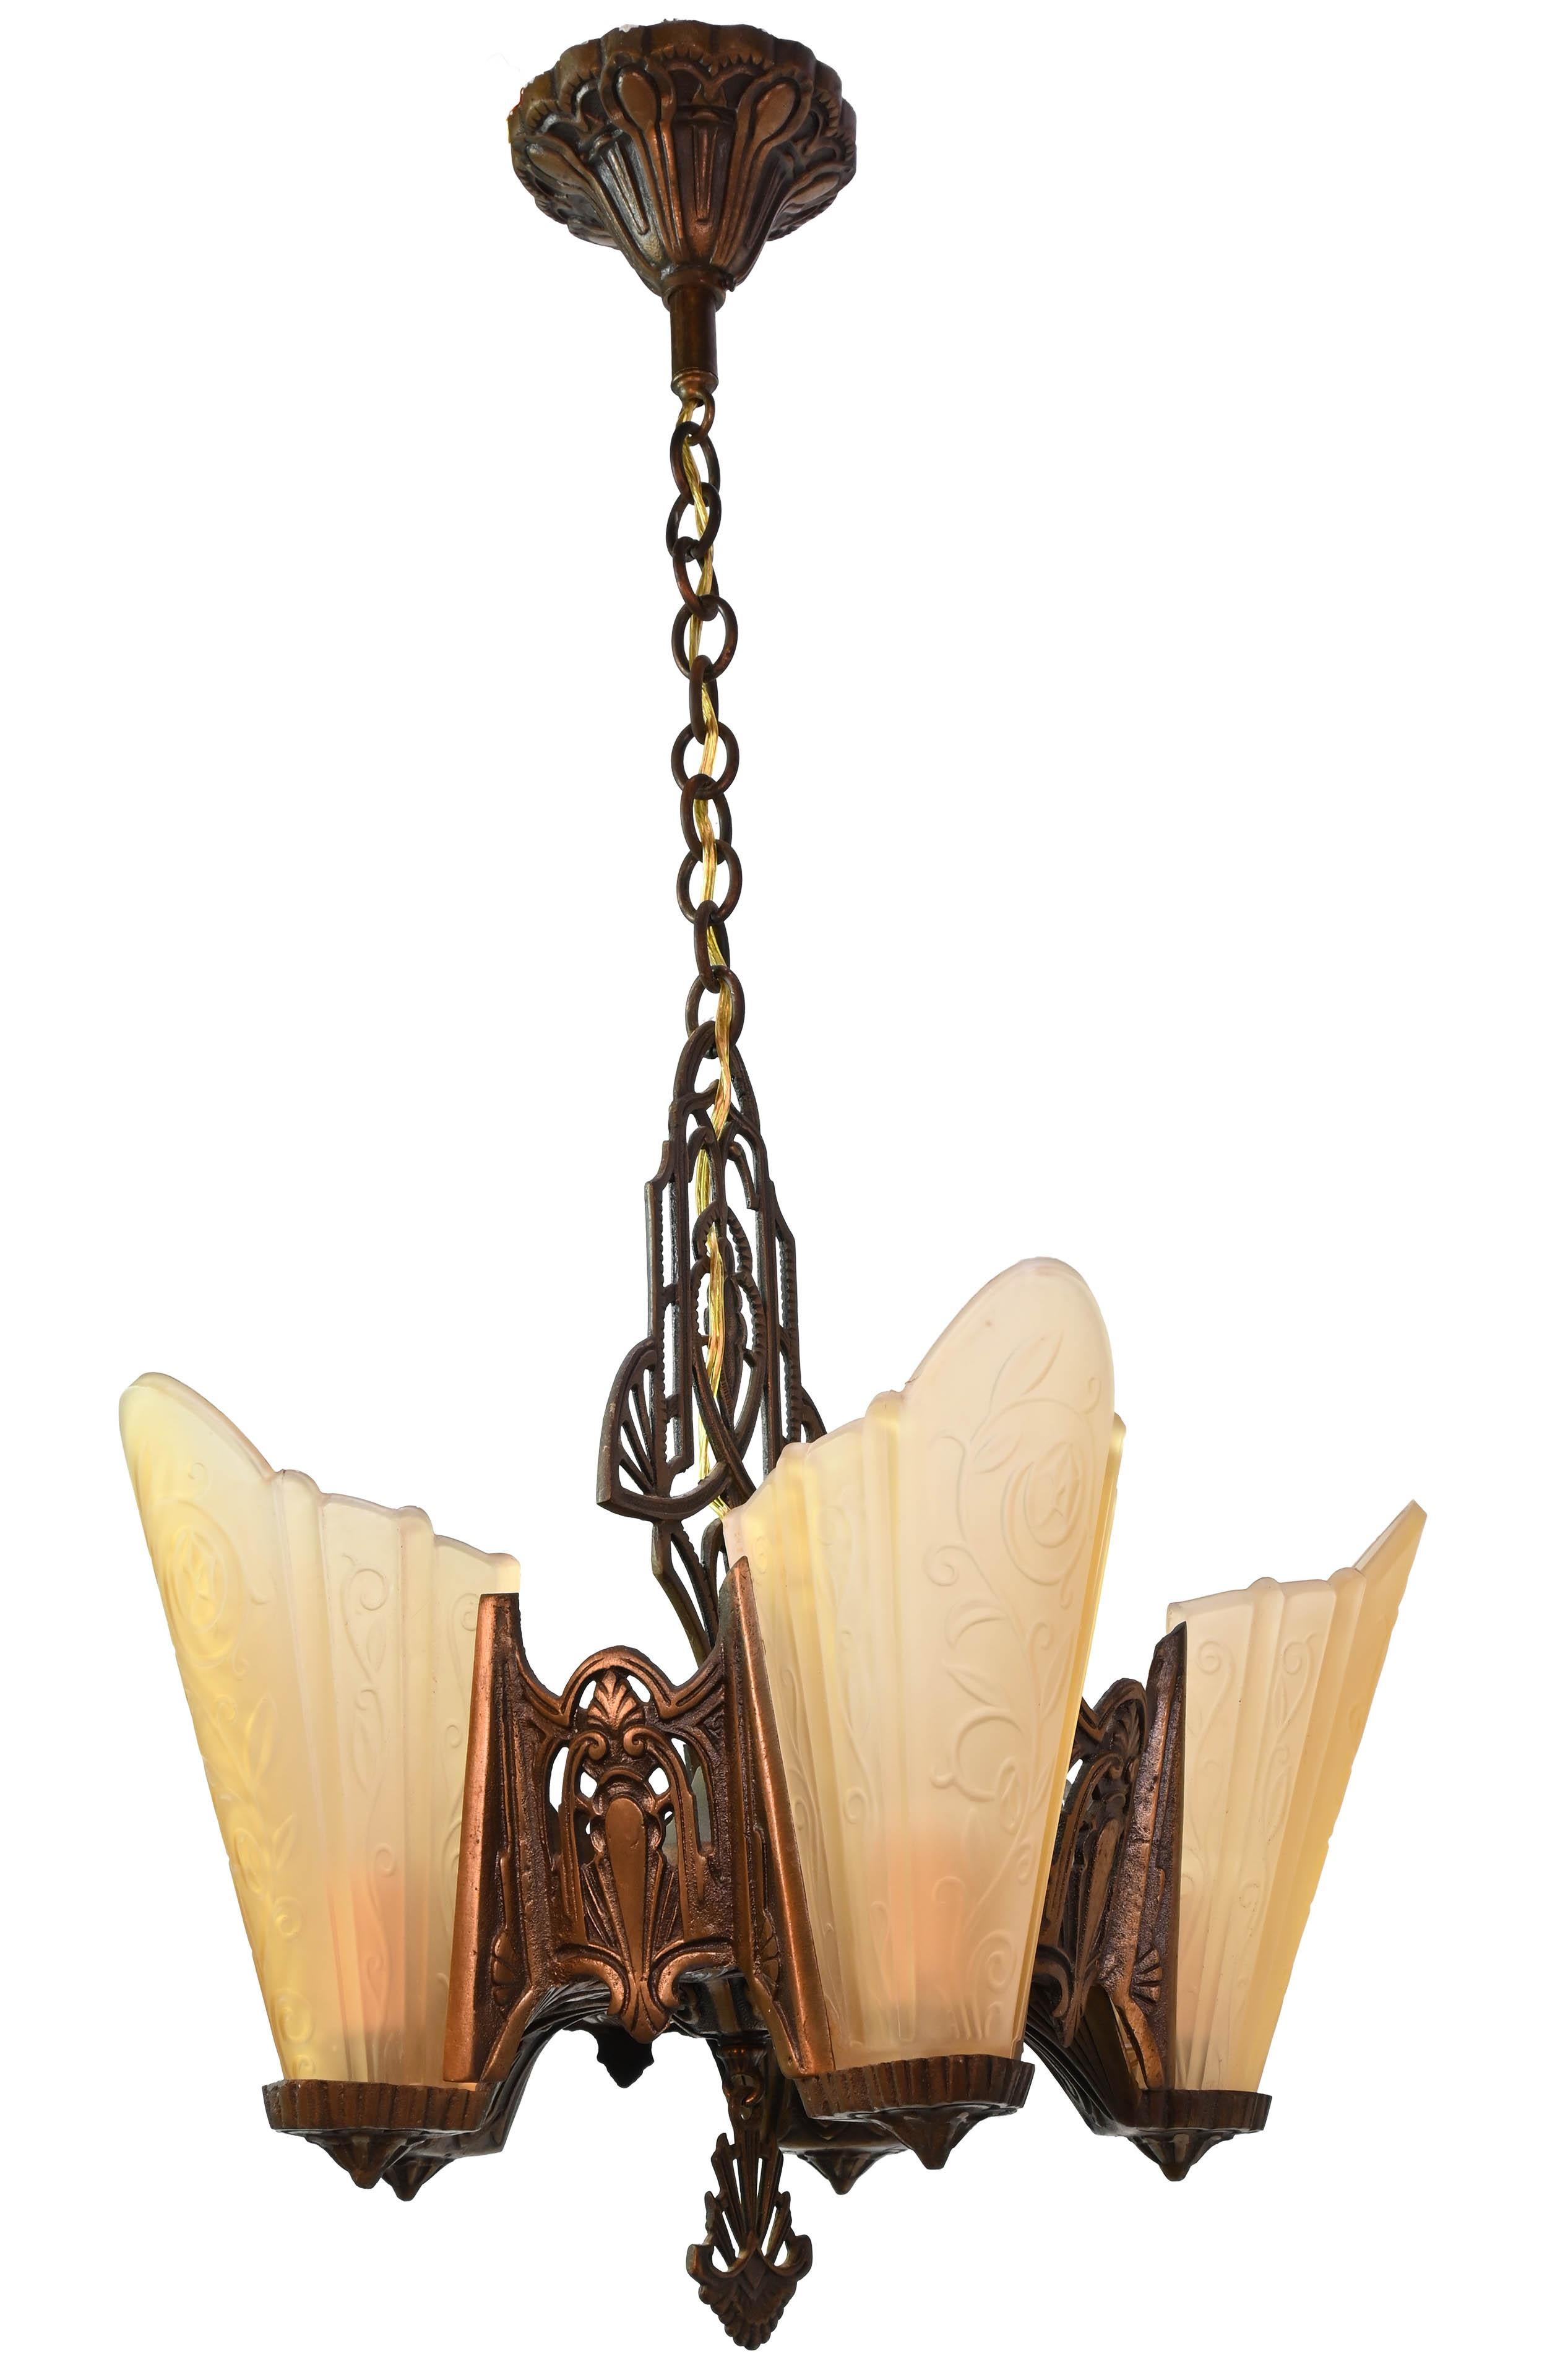 The beginning of the 20th century saw a variety of style in lighting fixtures and their detailing. Shell shaped slipper shades were commonly seen in lighting fixtures of the time. This light is a presentation piece, mixing Art Deco with curved,